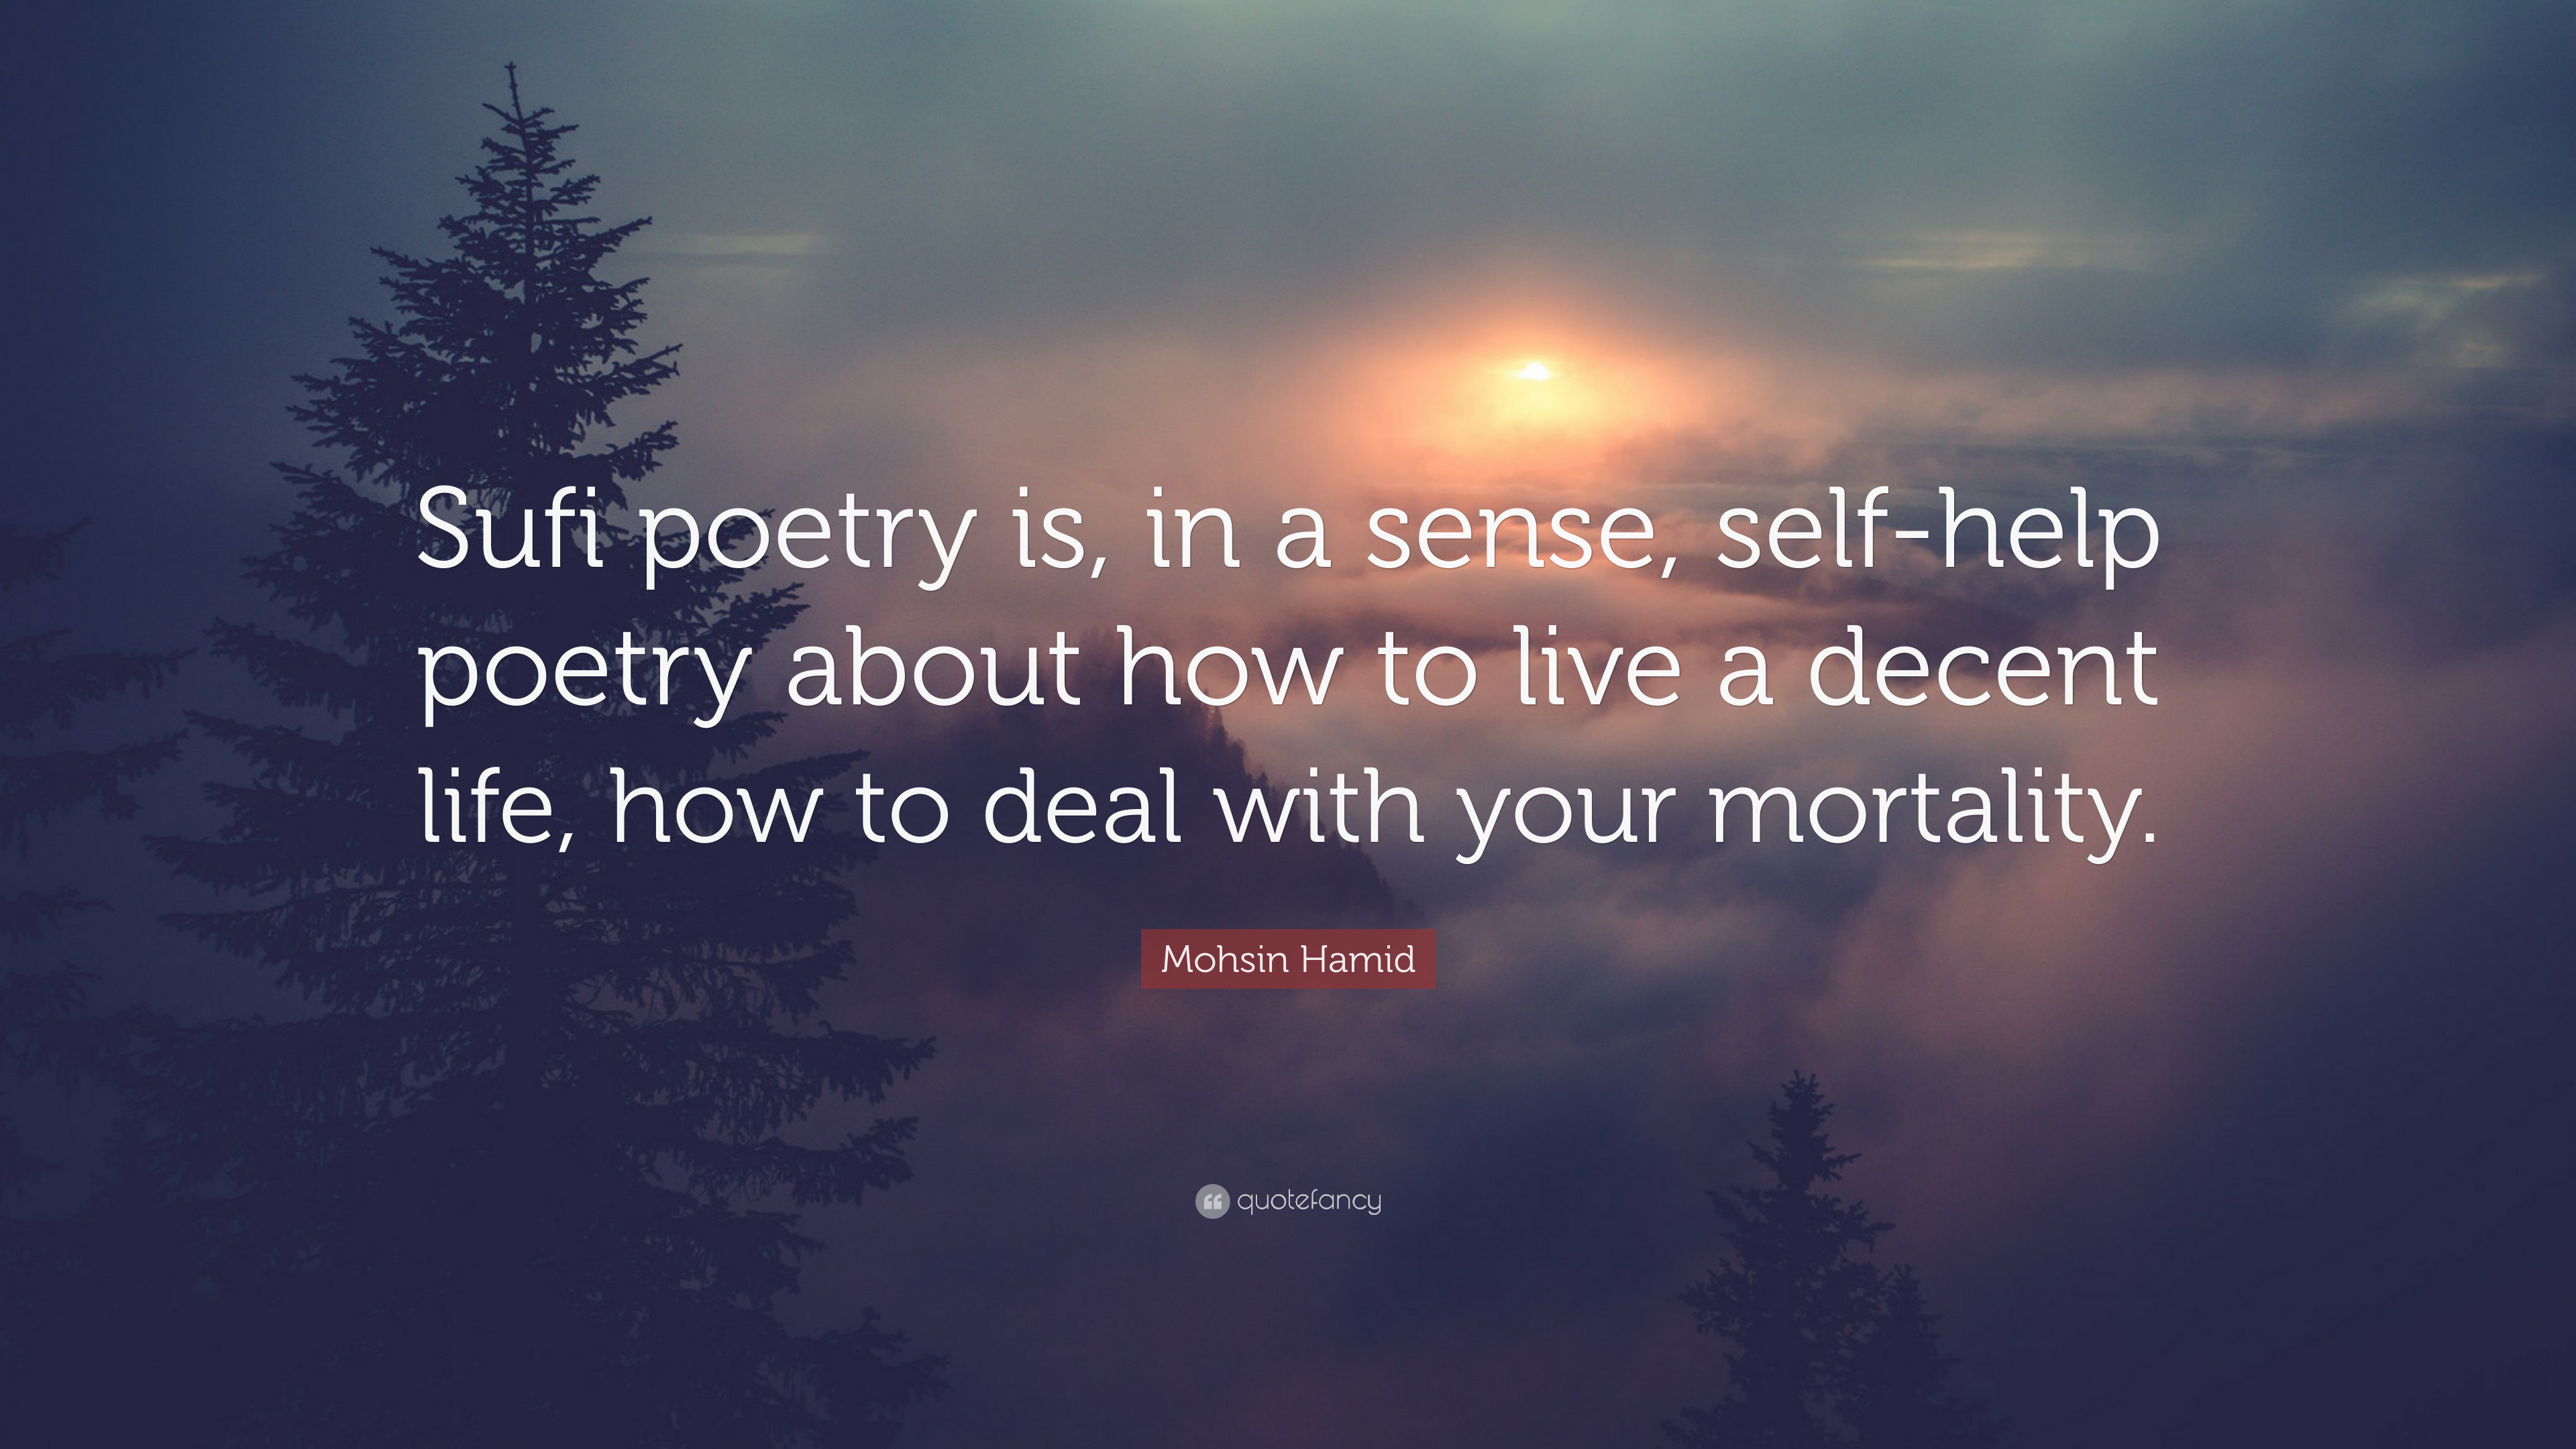 Mohsin Hamid Quote: "Sufi poetry is, in a sense, self.